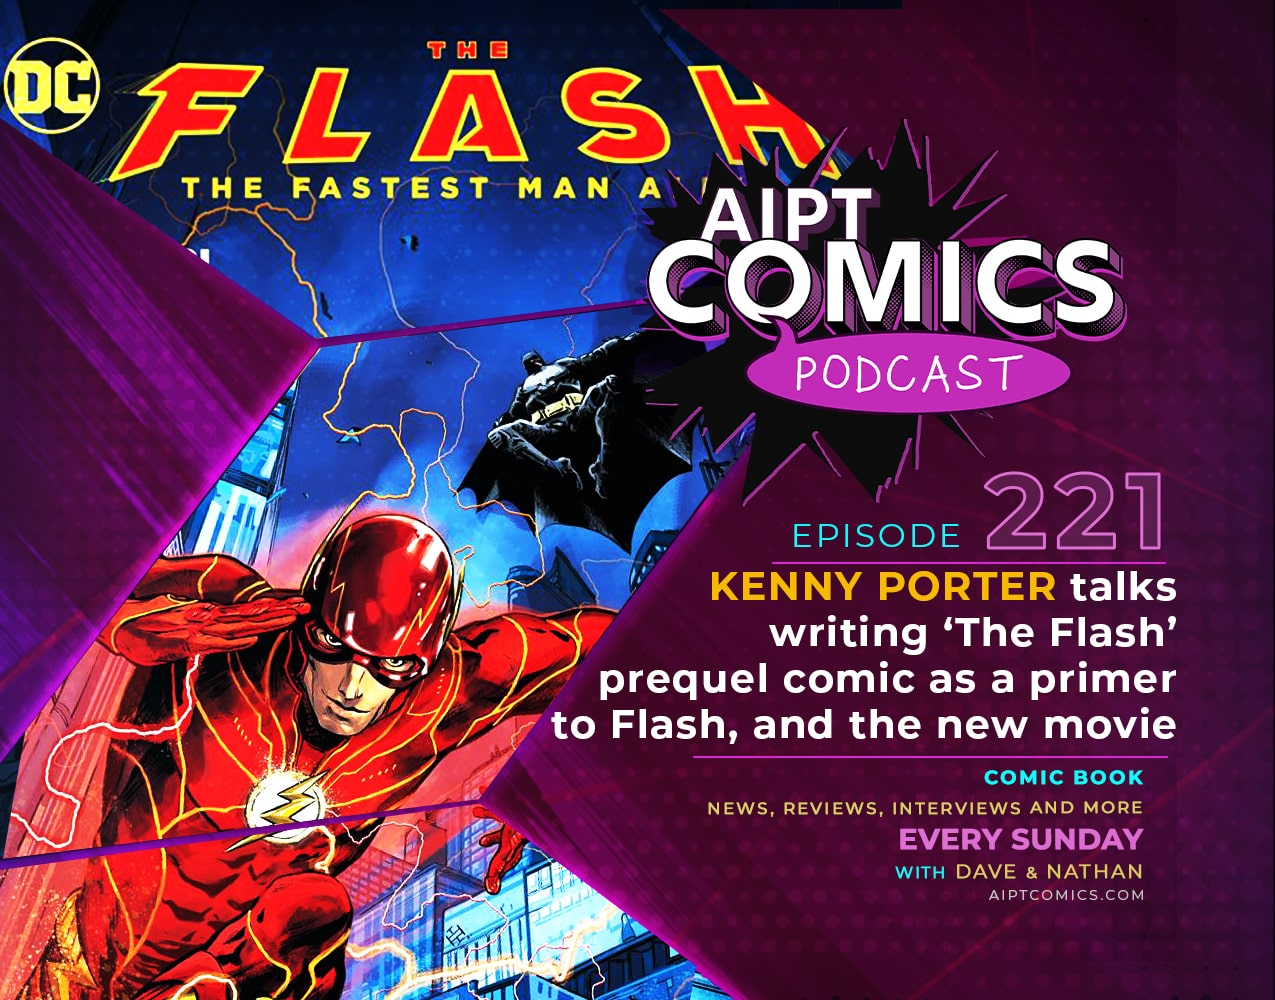 AIPT Comics Podcast episode 221: Kenny Porter talks writing ‘The Flash’ prequel comic as a primer to Flash, and the new movie